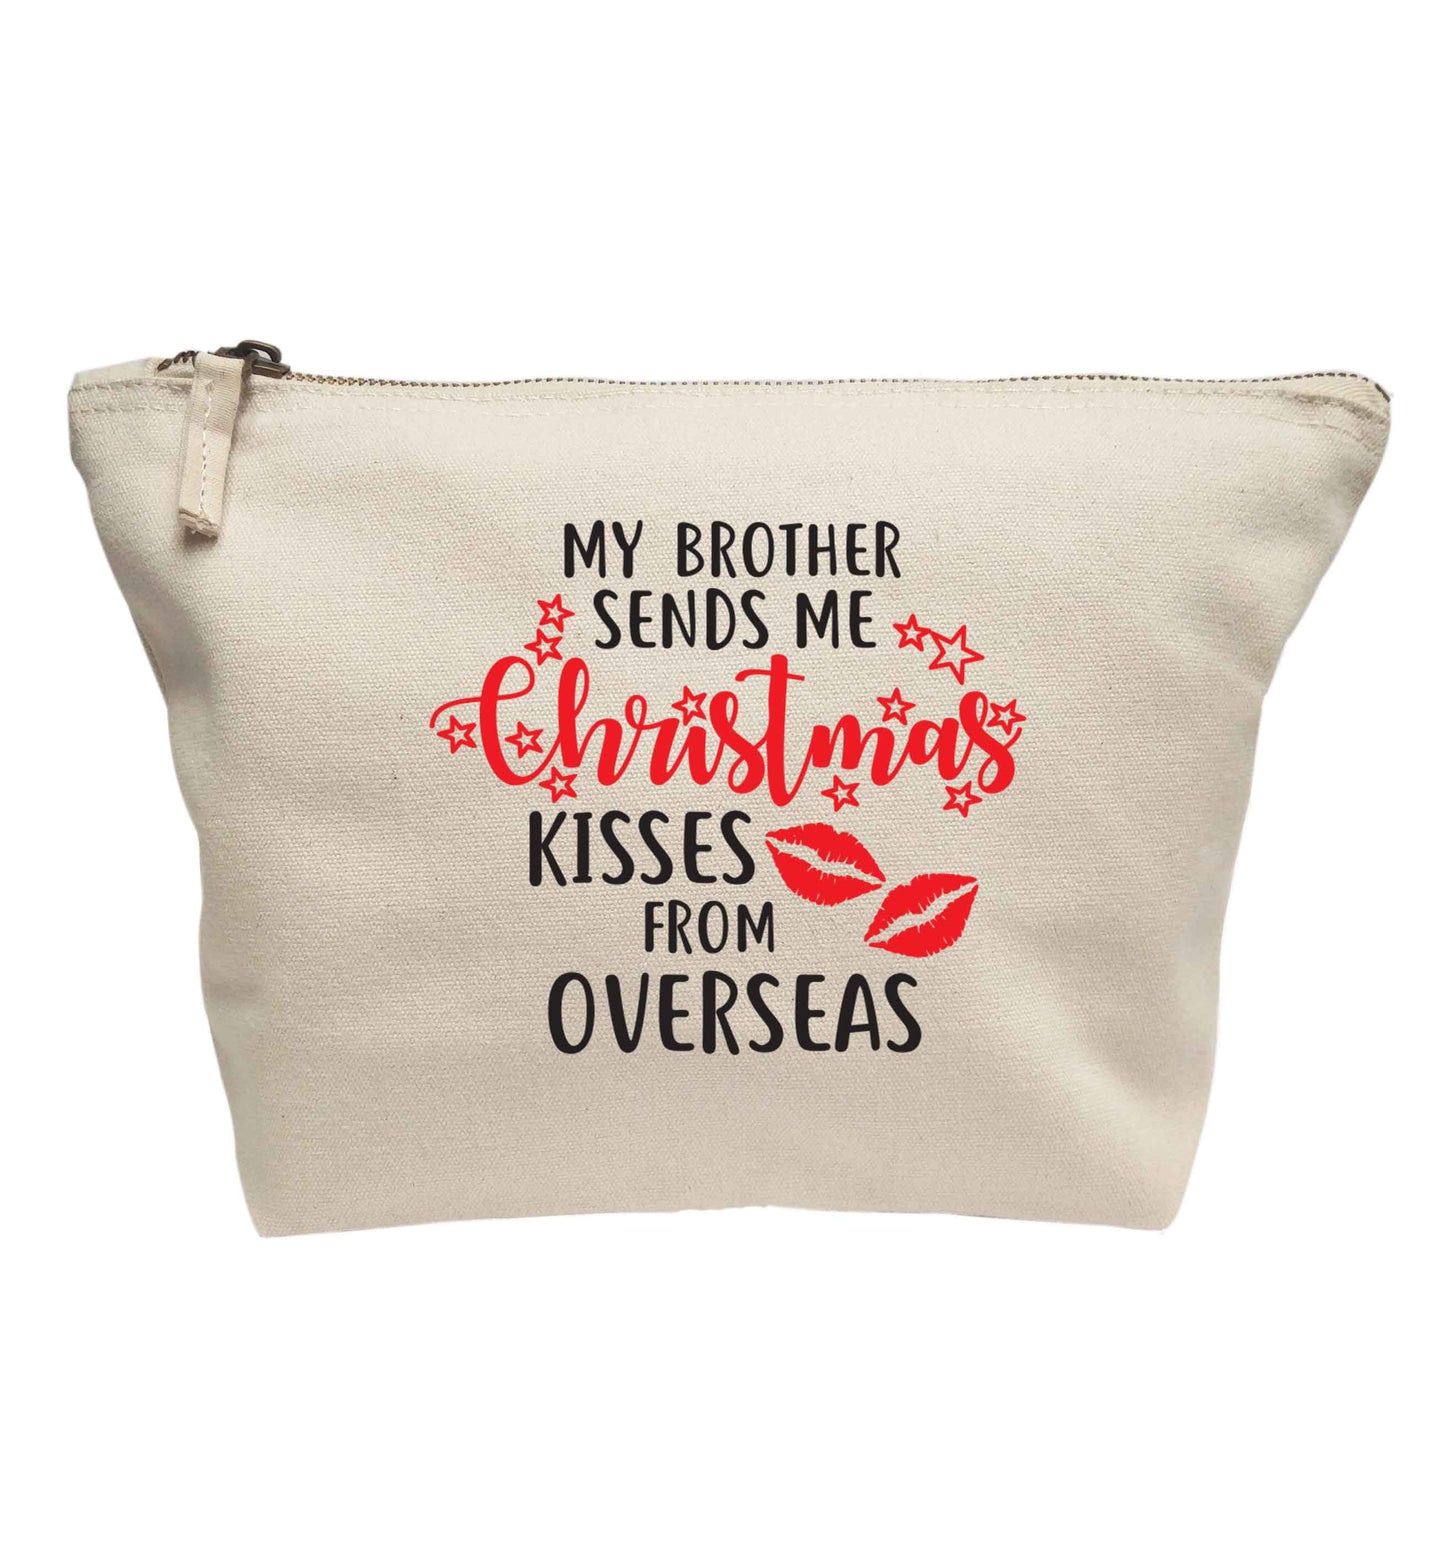 My brother sends me Christmas kisses from overseas | Makeup / wash bag